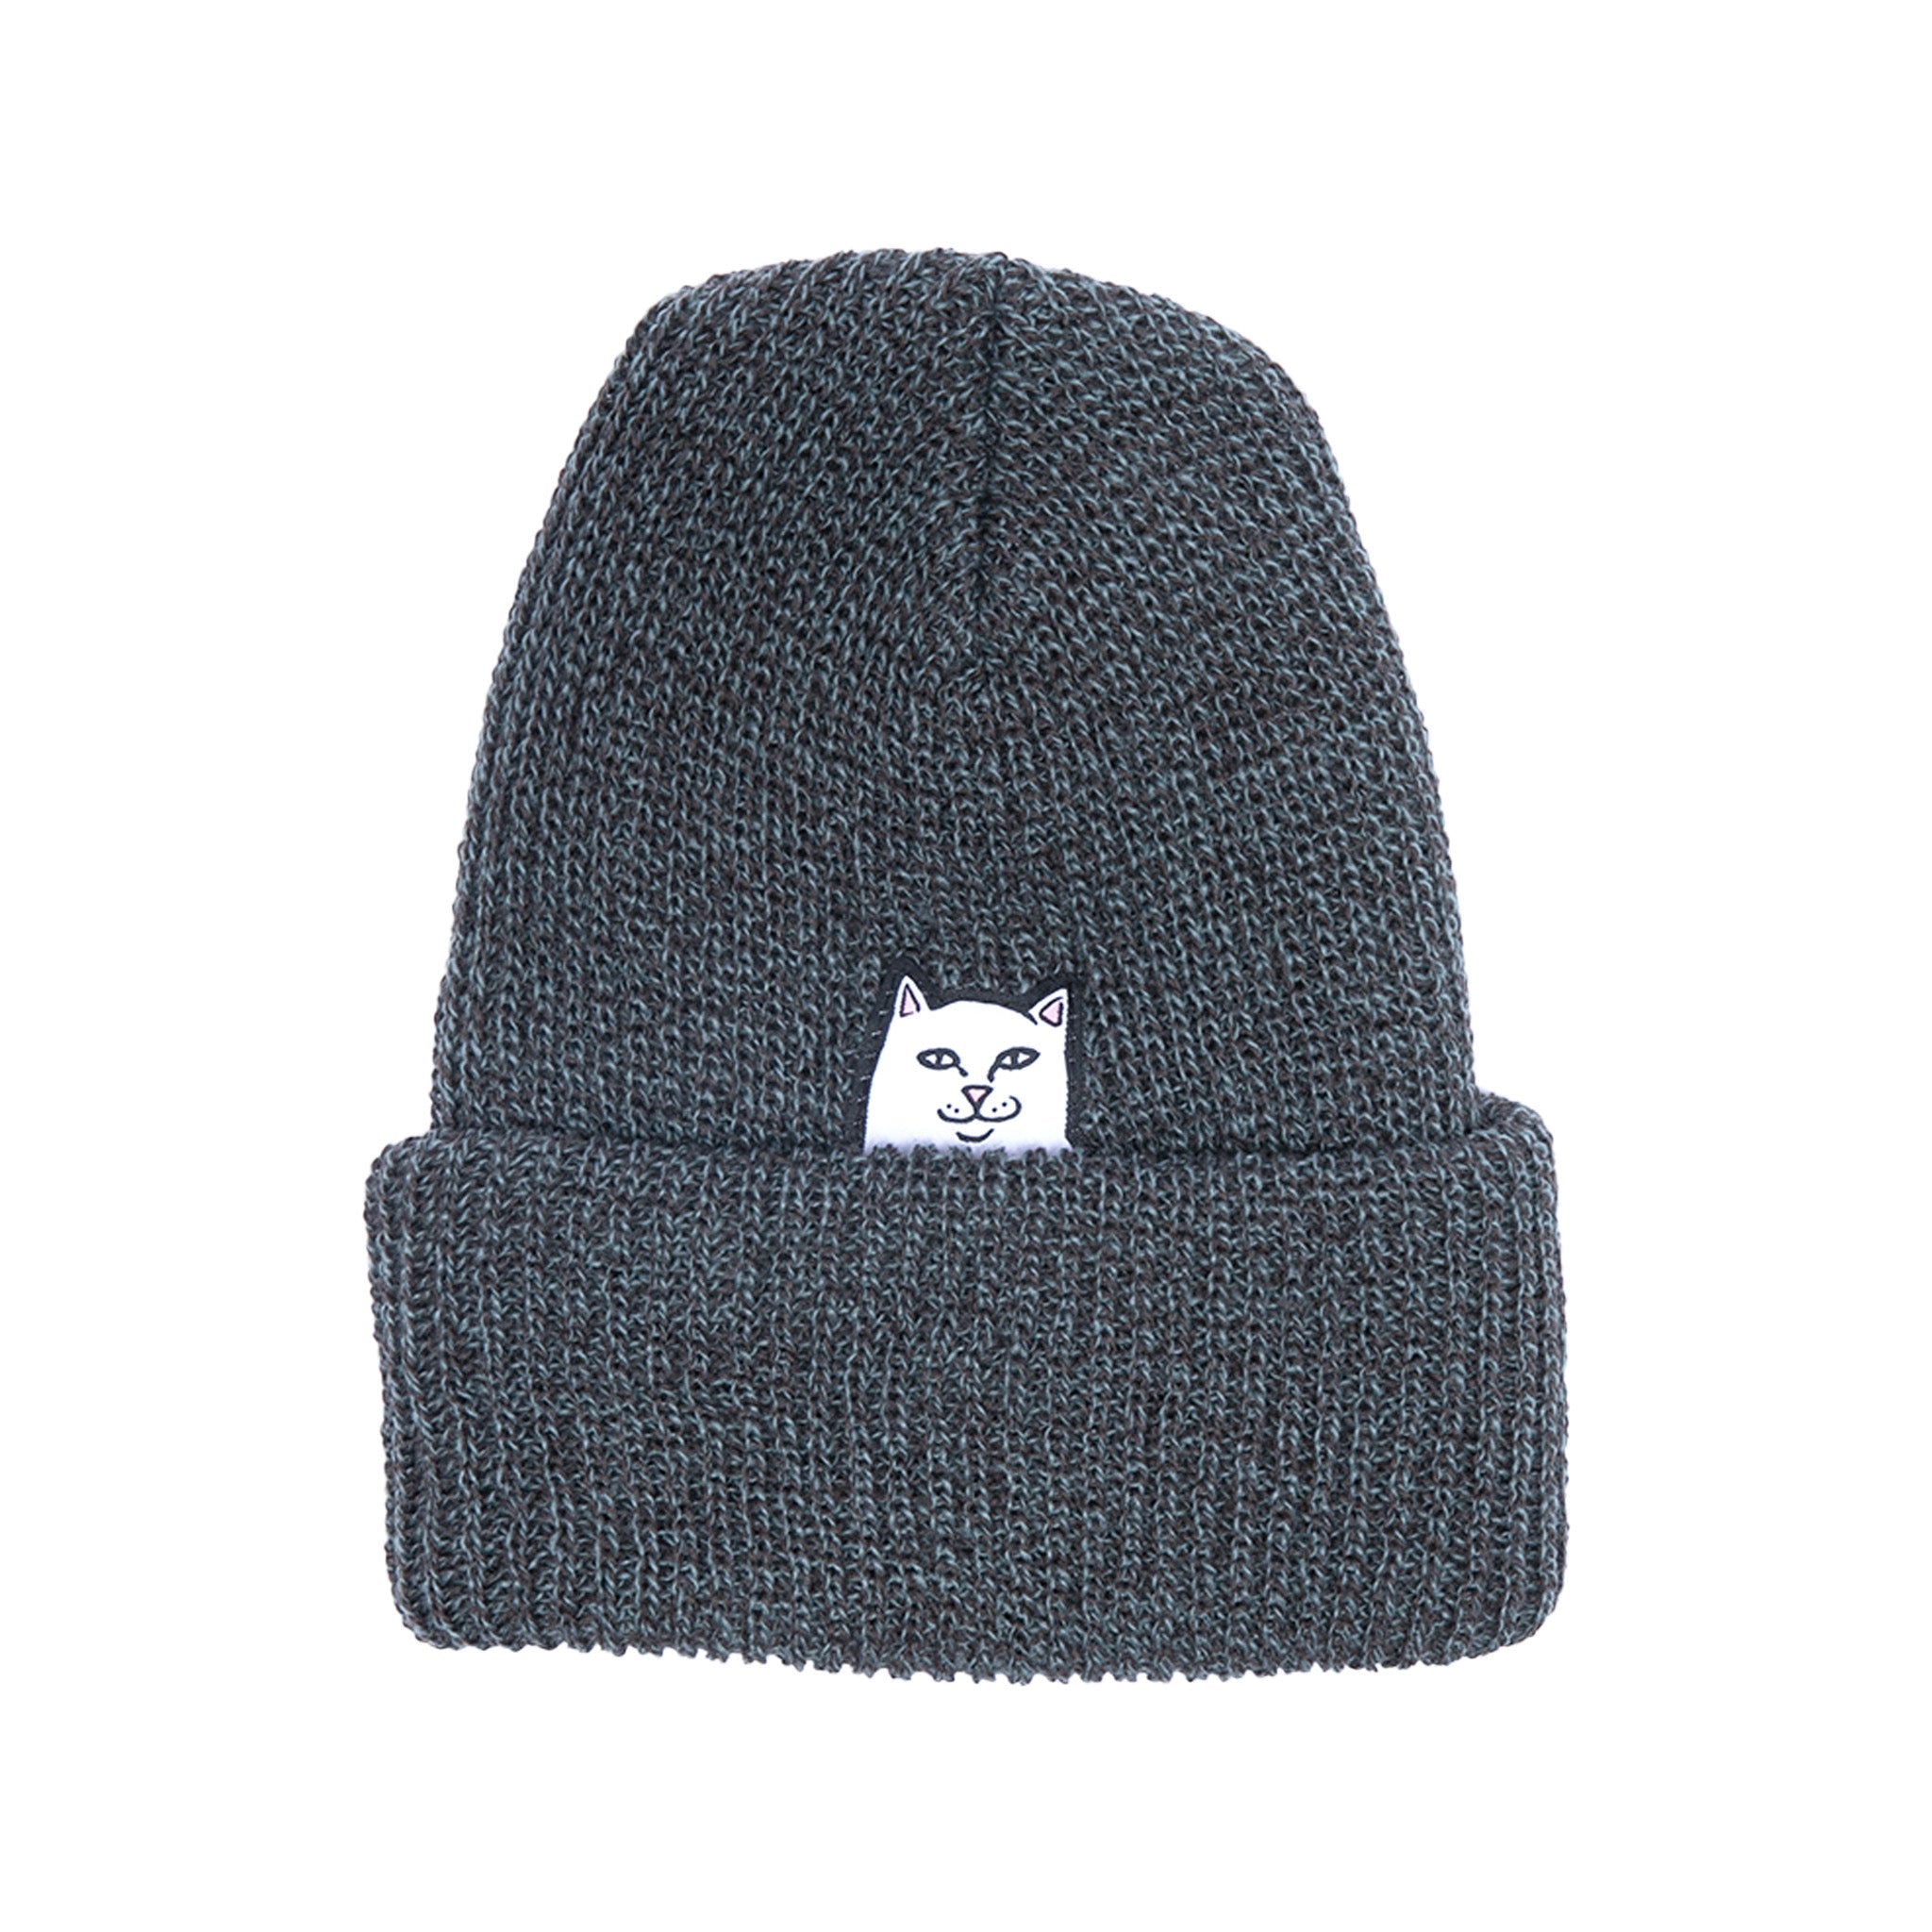 Lord Nermal Patch Beanie (Multi)